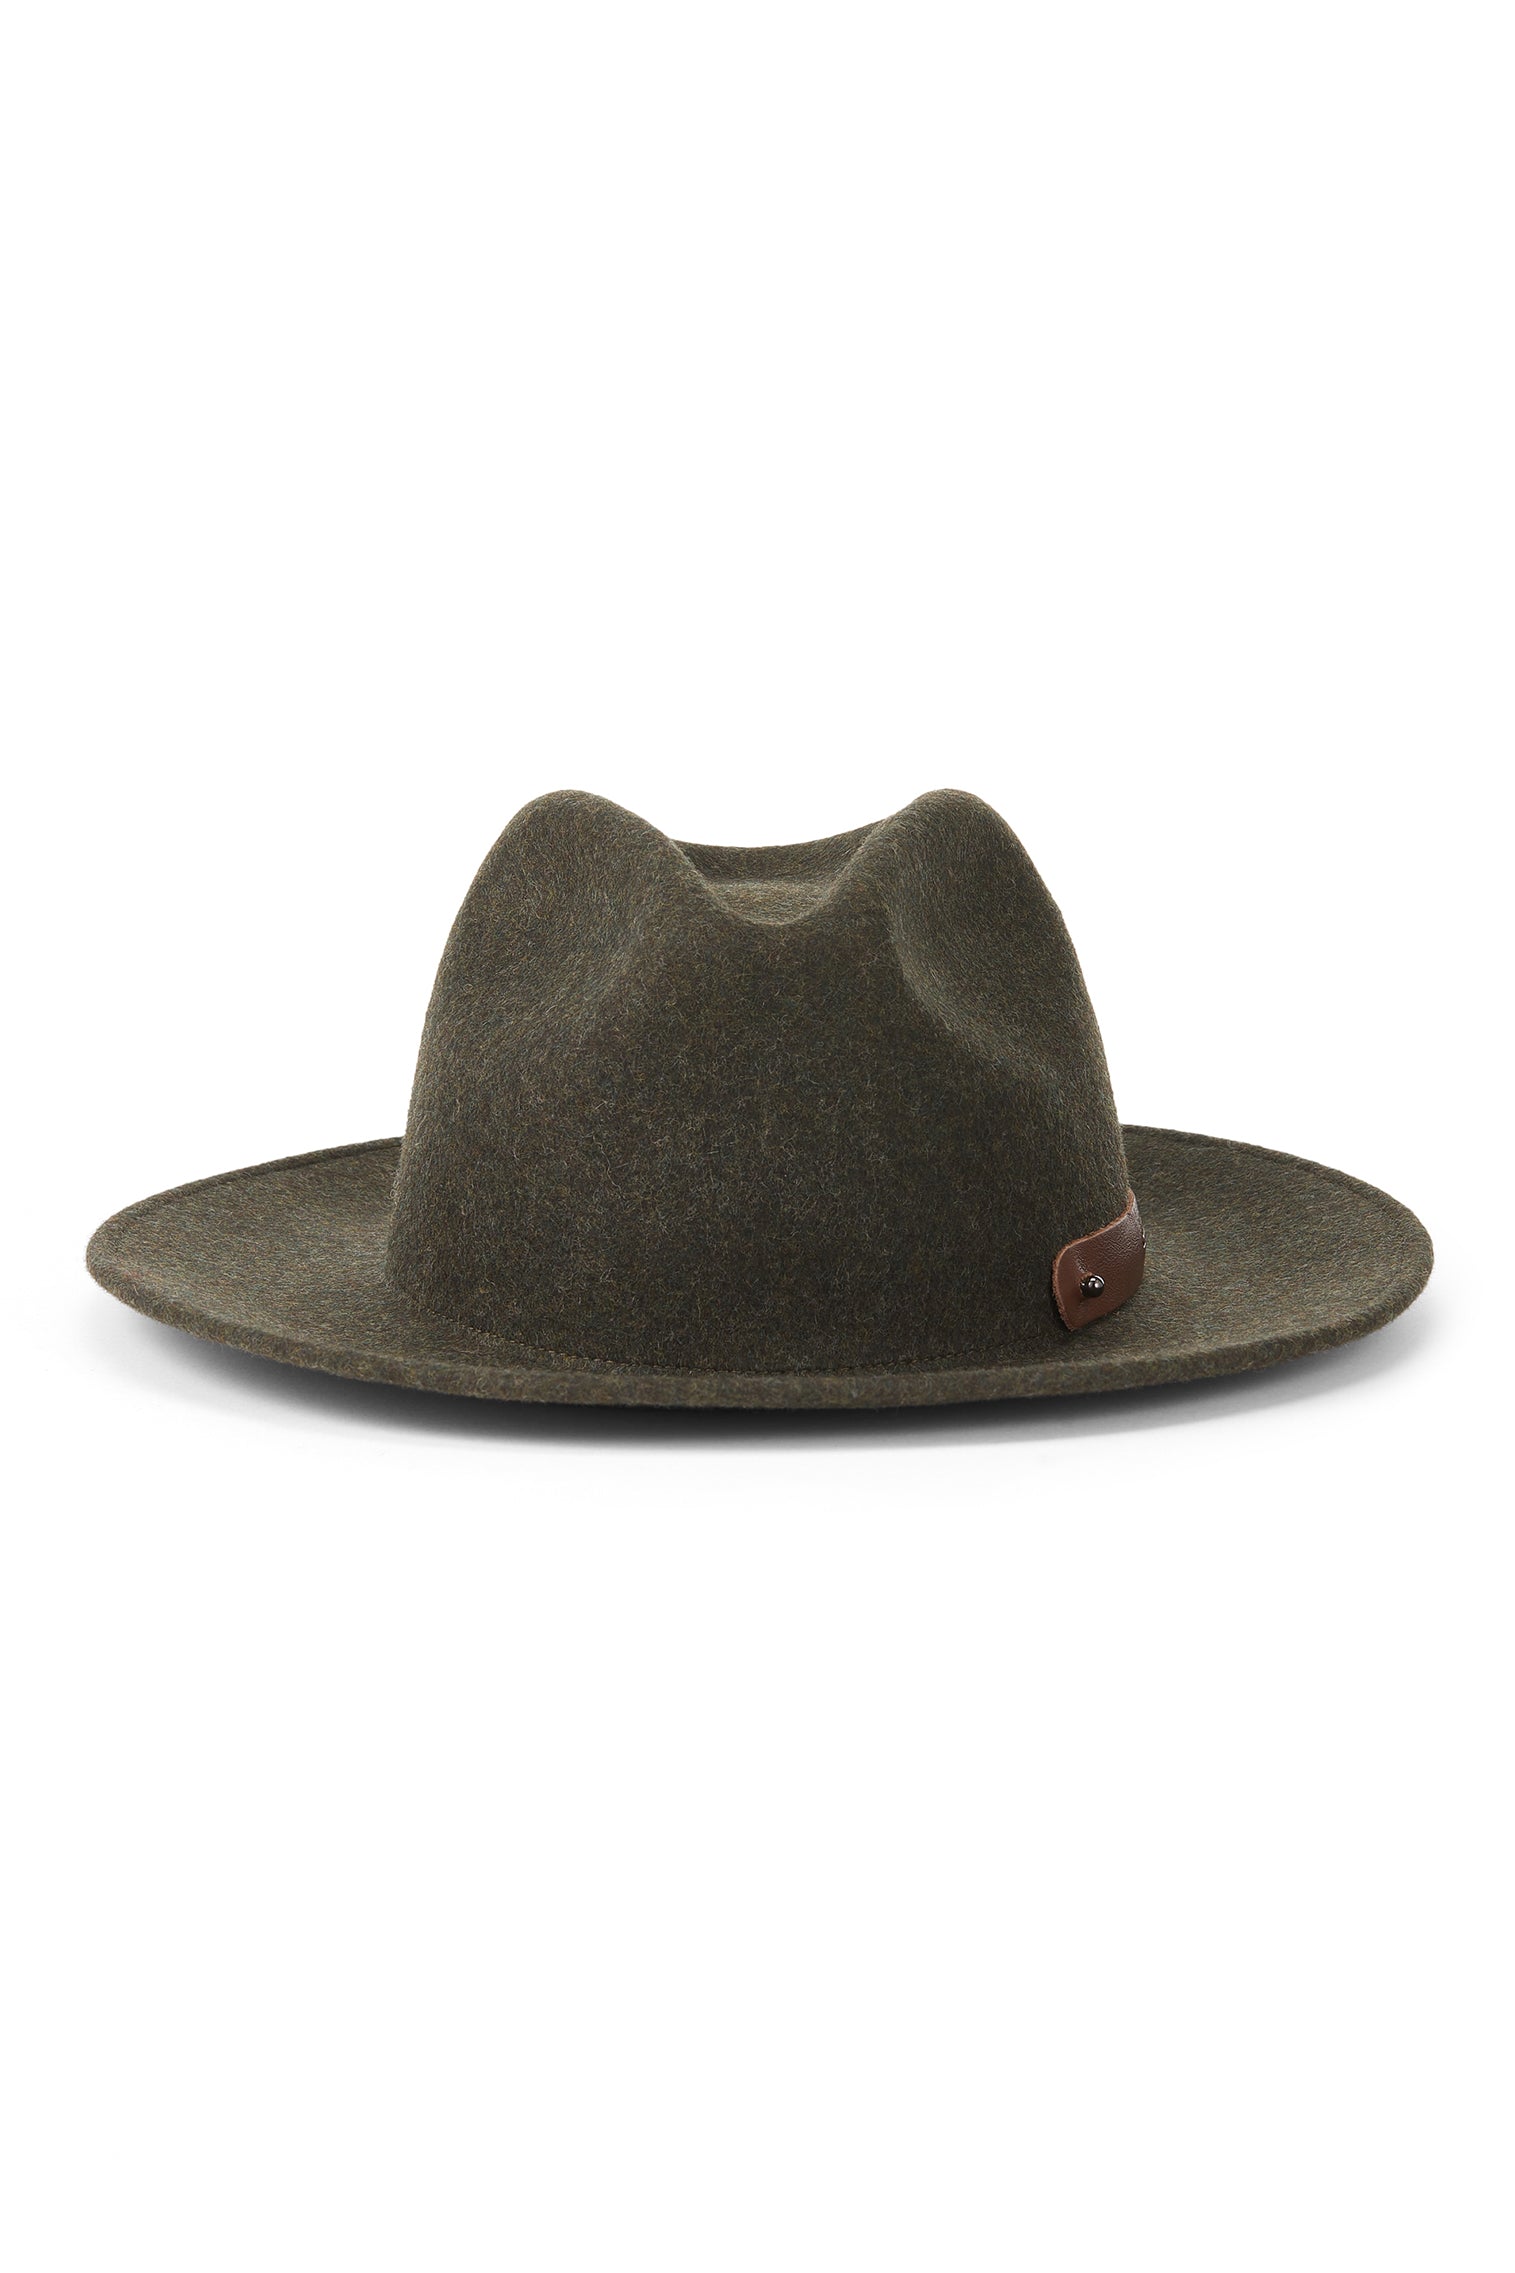 Cheltenham Rollable Trilby - Women's Fedoras, Trilbies & Cloches - Lock & Co. Hatters London UK